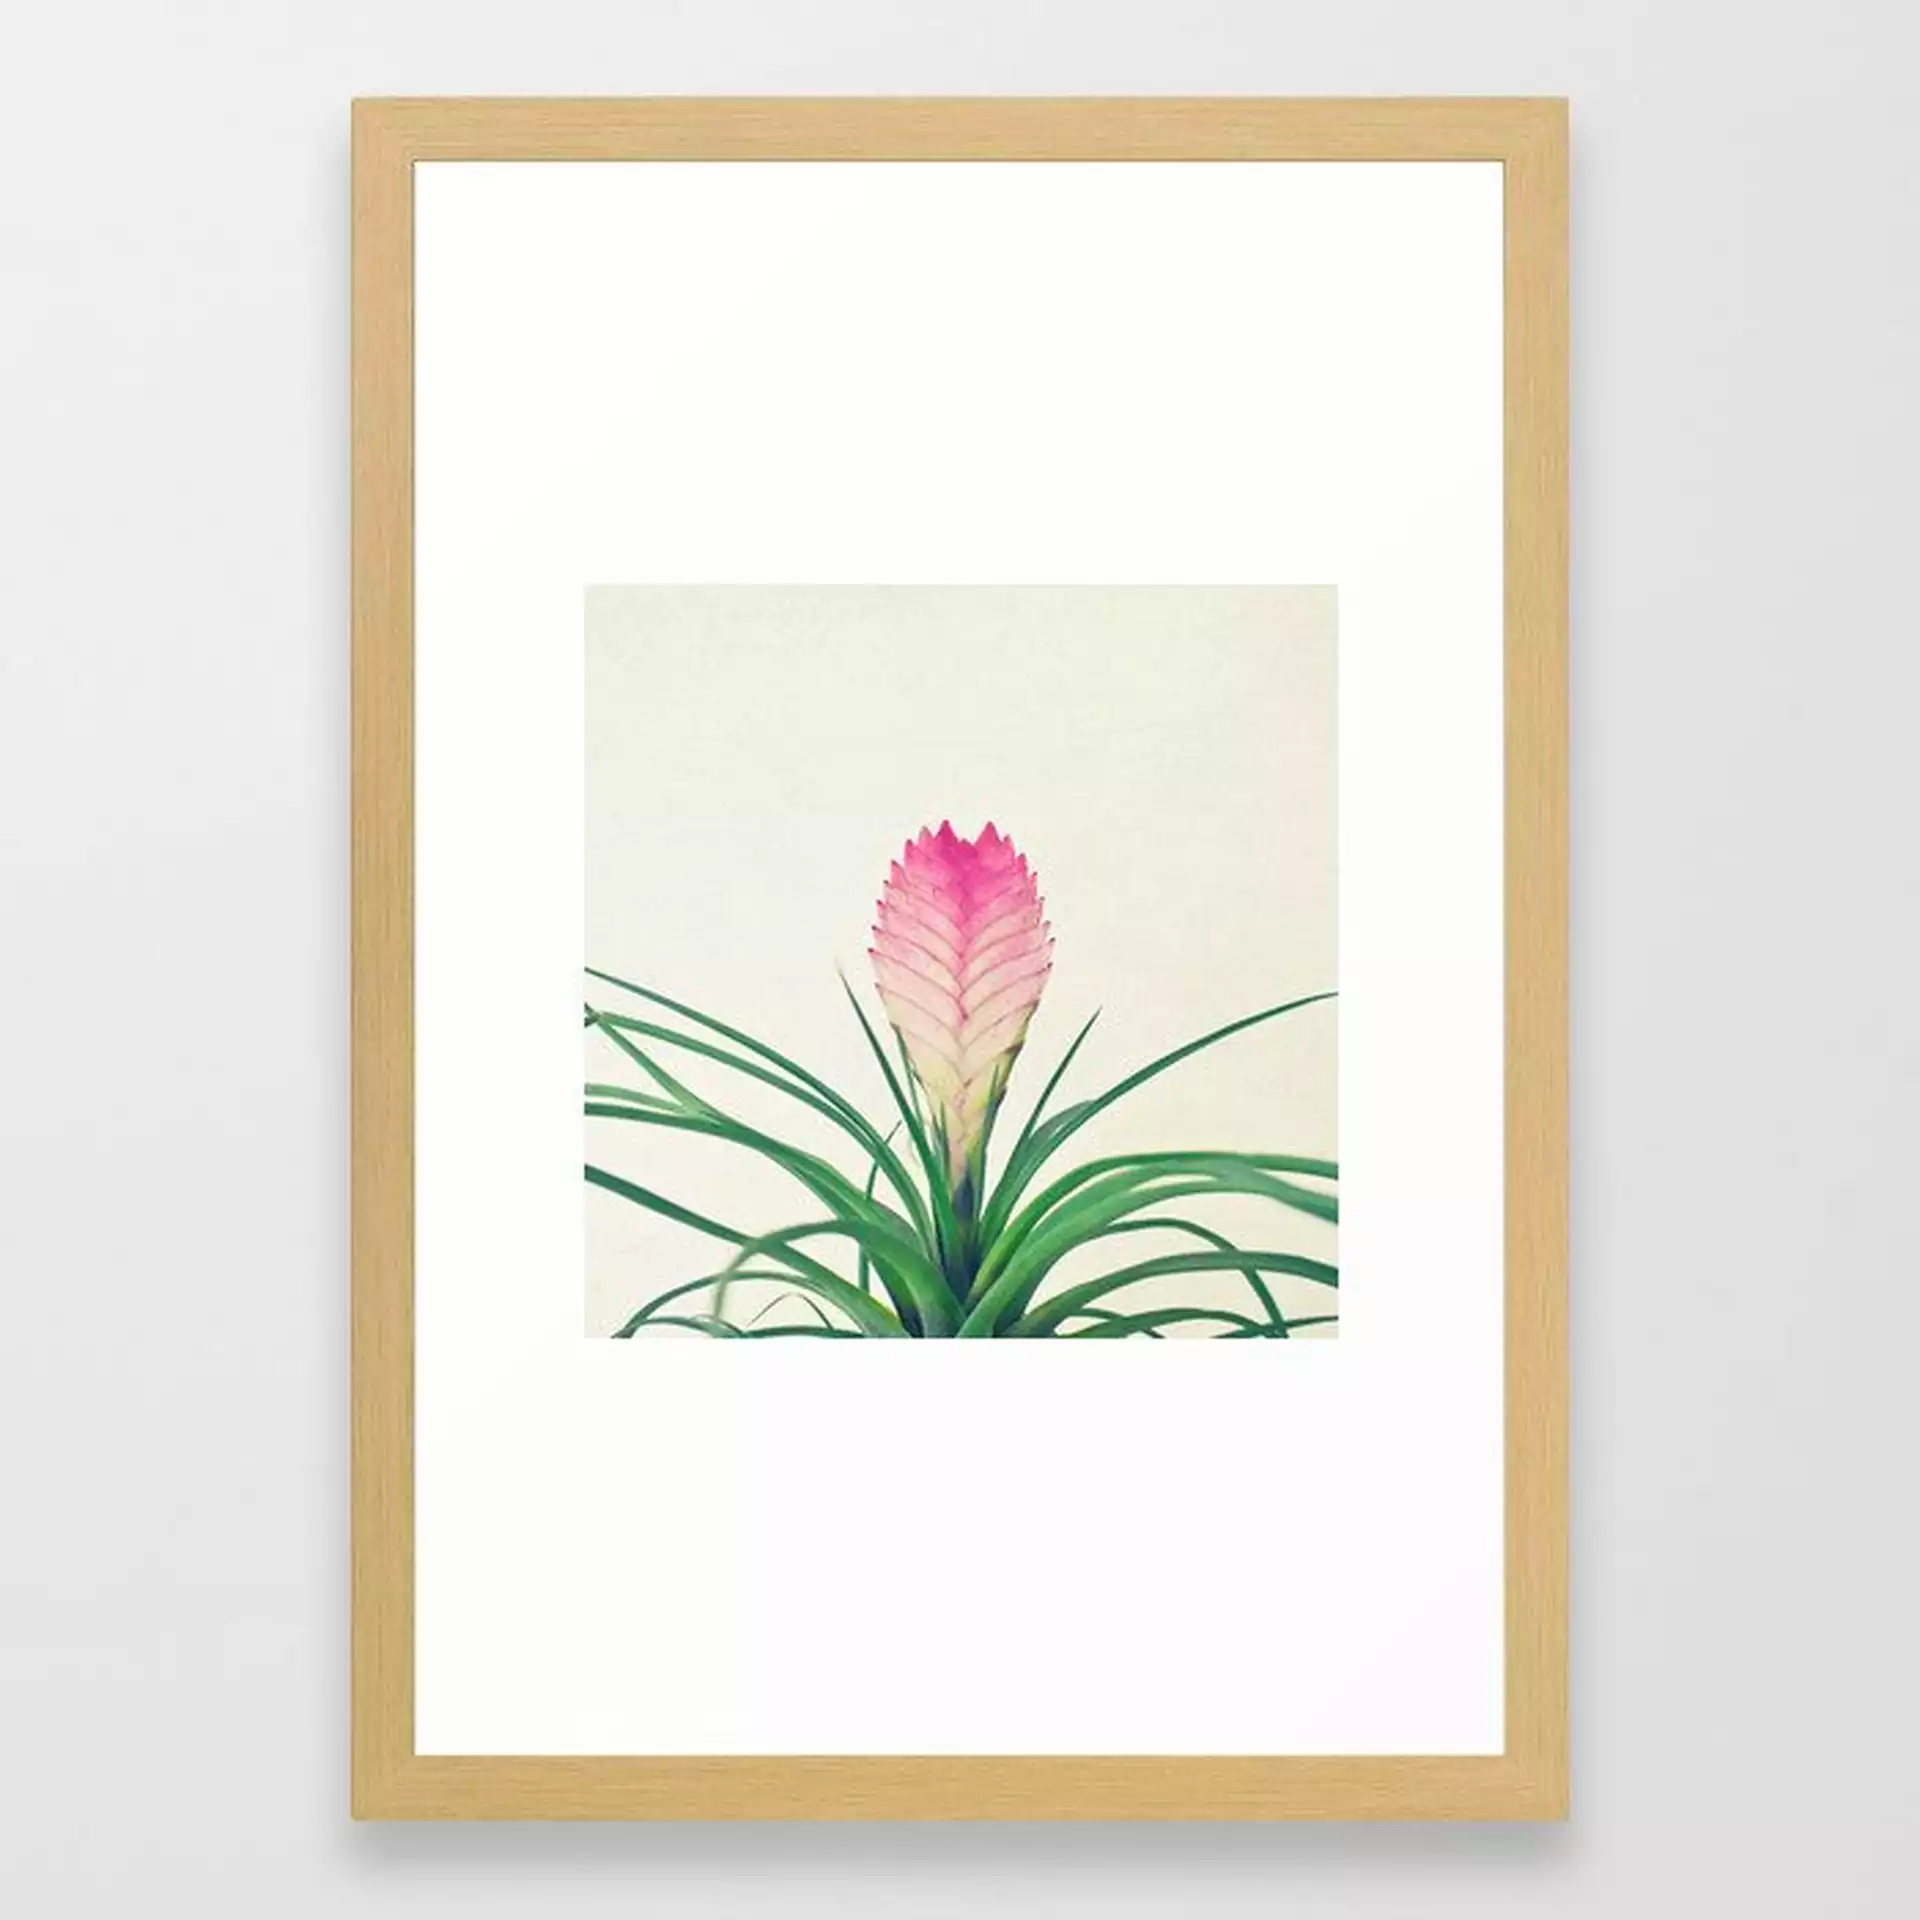 Bromelia Ii Framed Art Print by Cassia Beck - Conservation Natural - SMALL-15x21